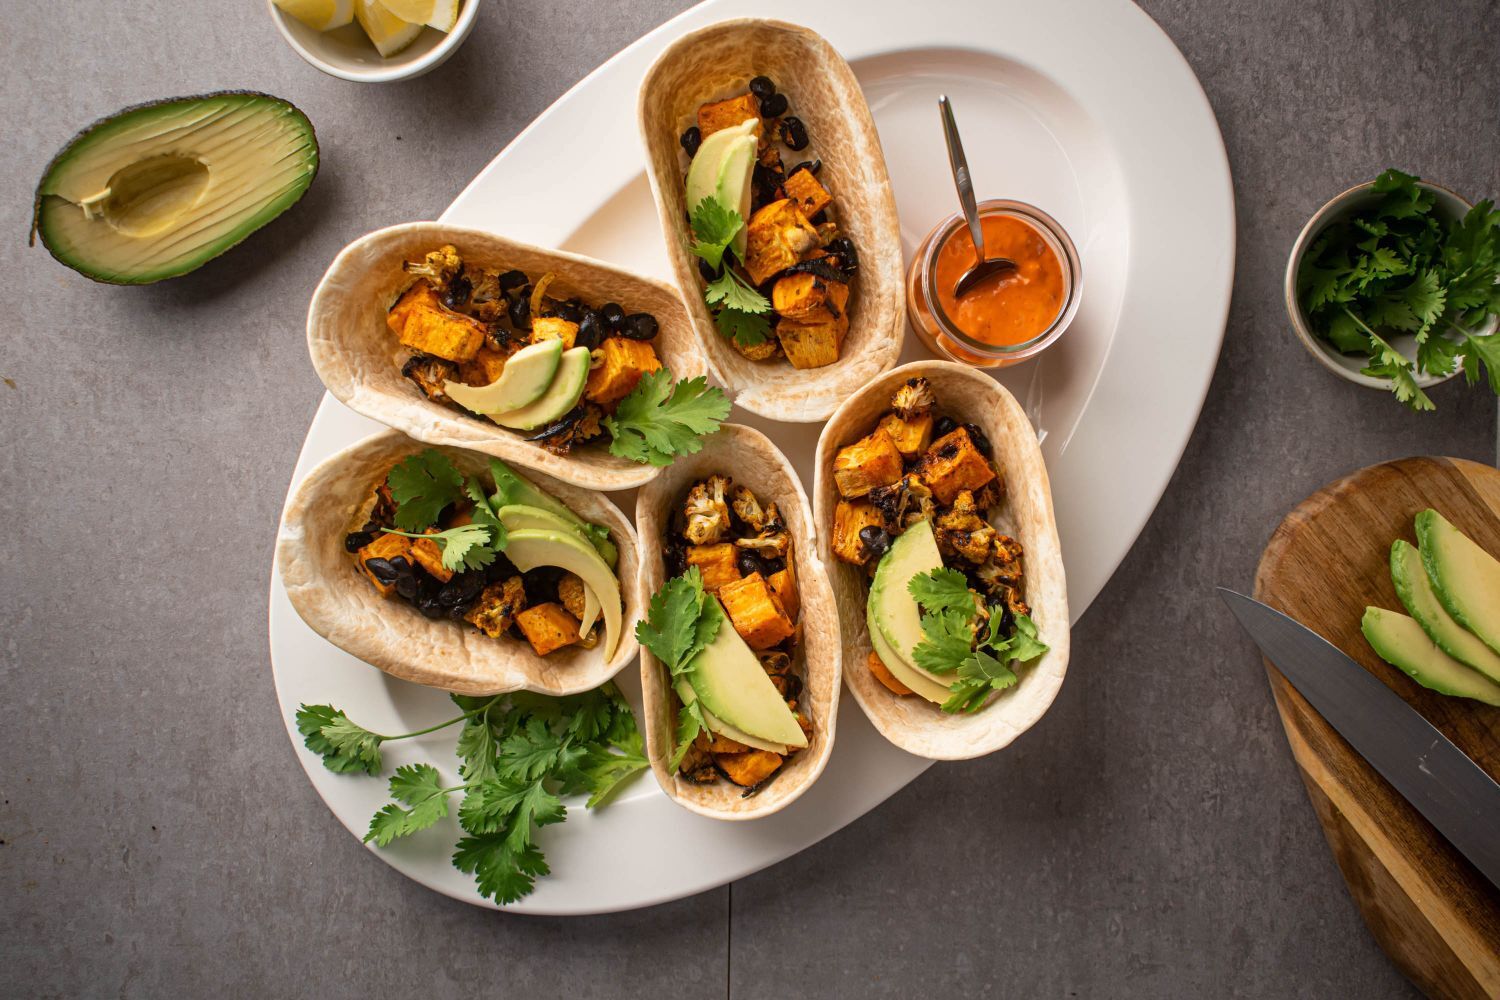 Sweet potato tacos with black beans, cauliflower, avocado, and cilantro served in corn tortillas. 